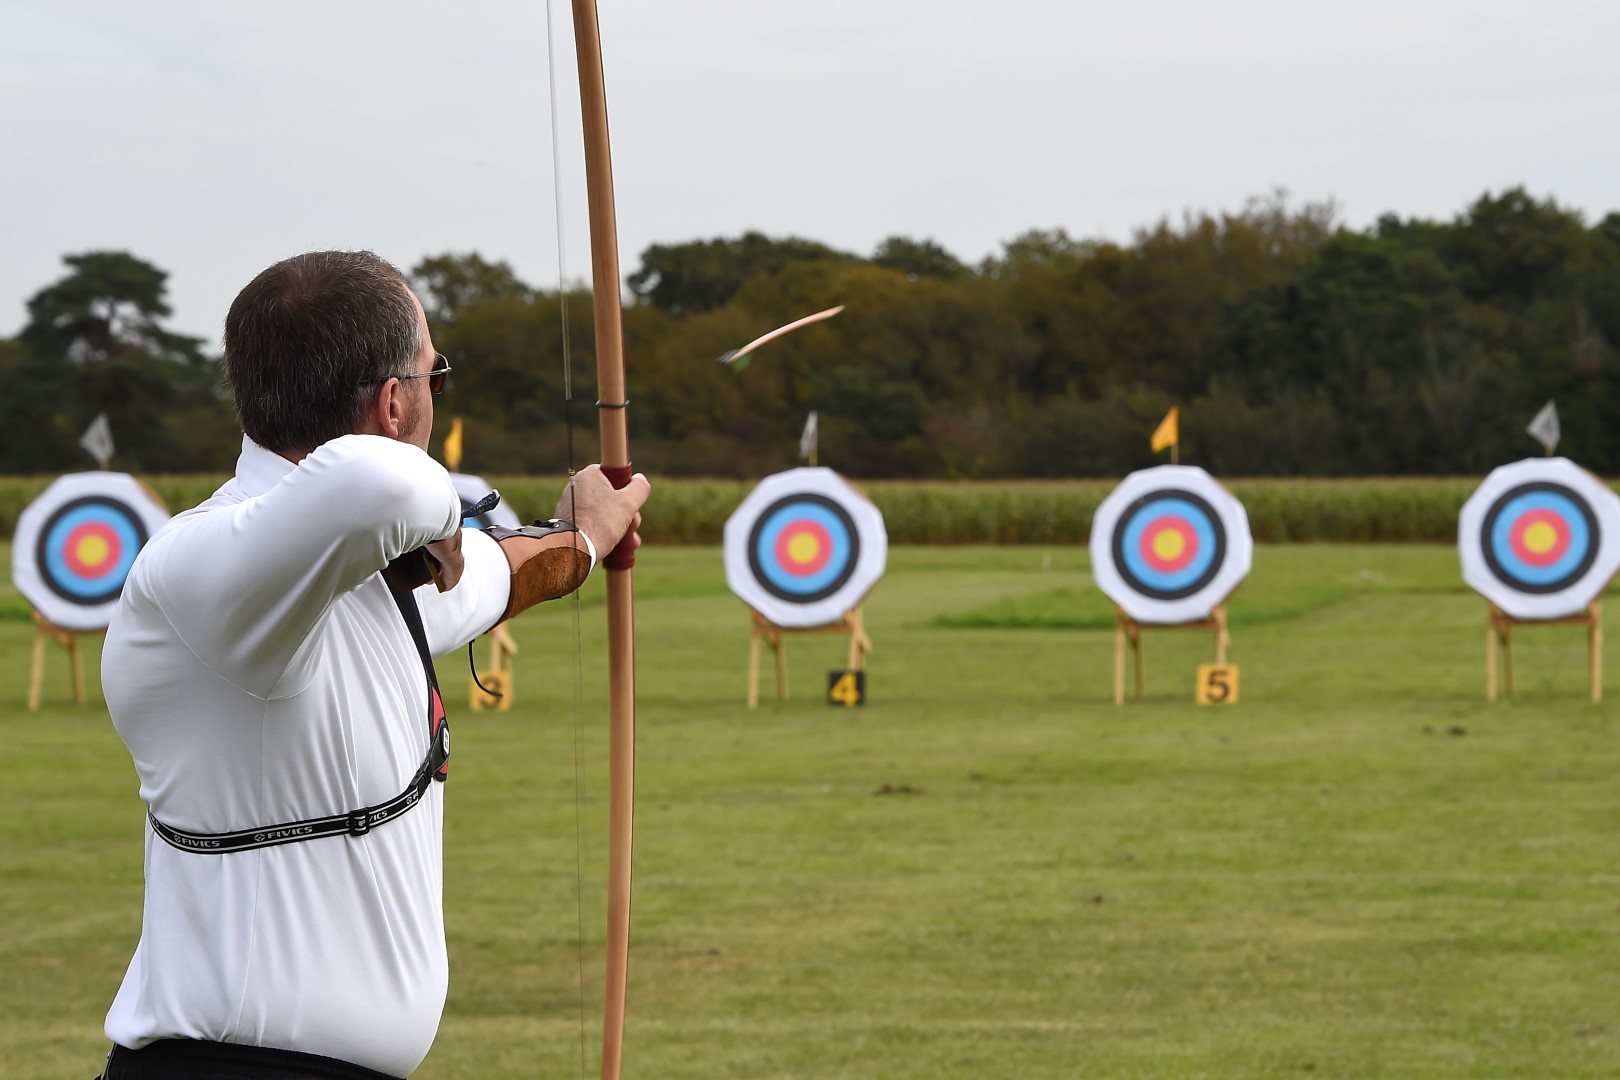 7 Reasons Why You Should Target Beginners